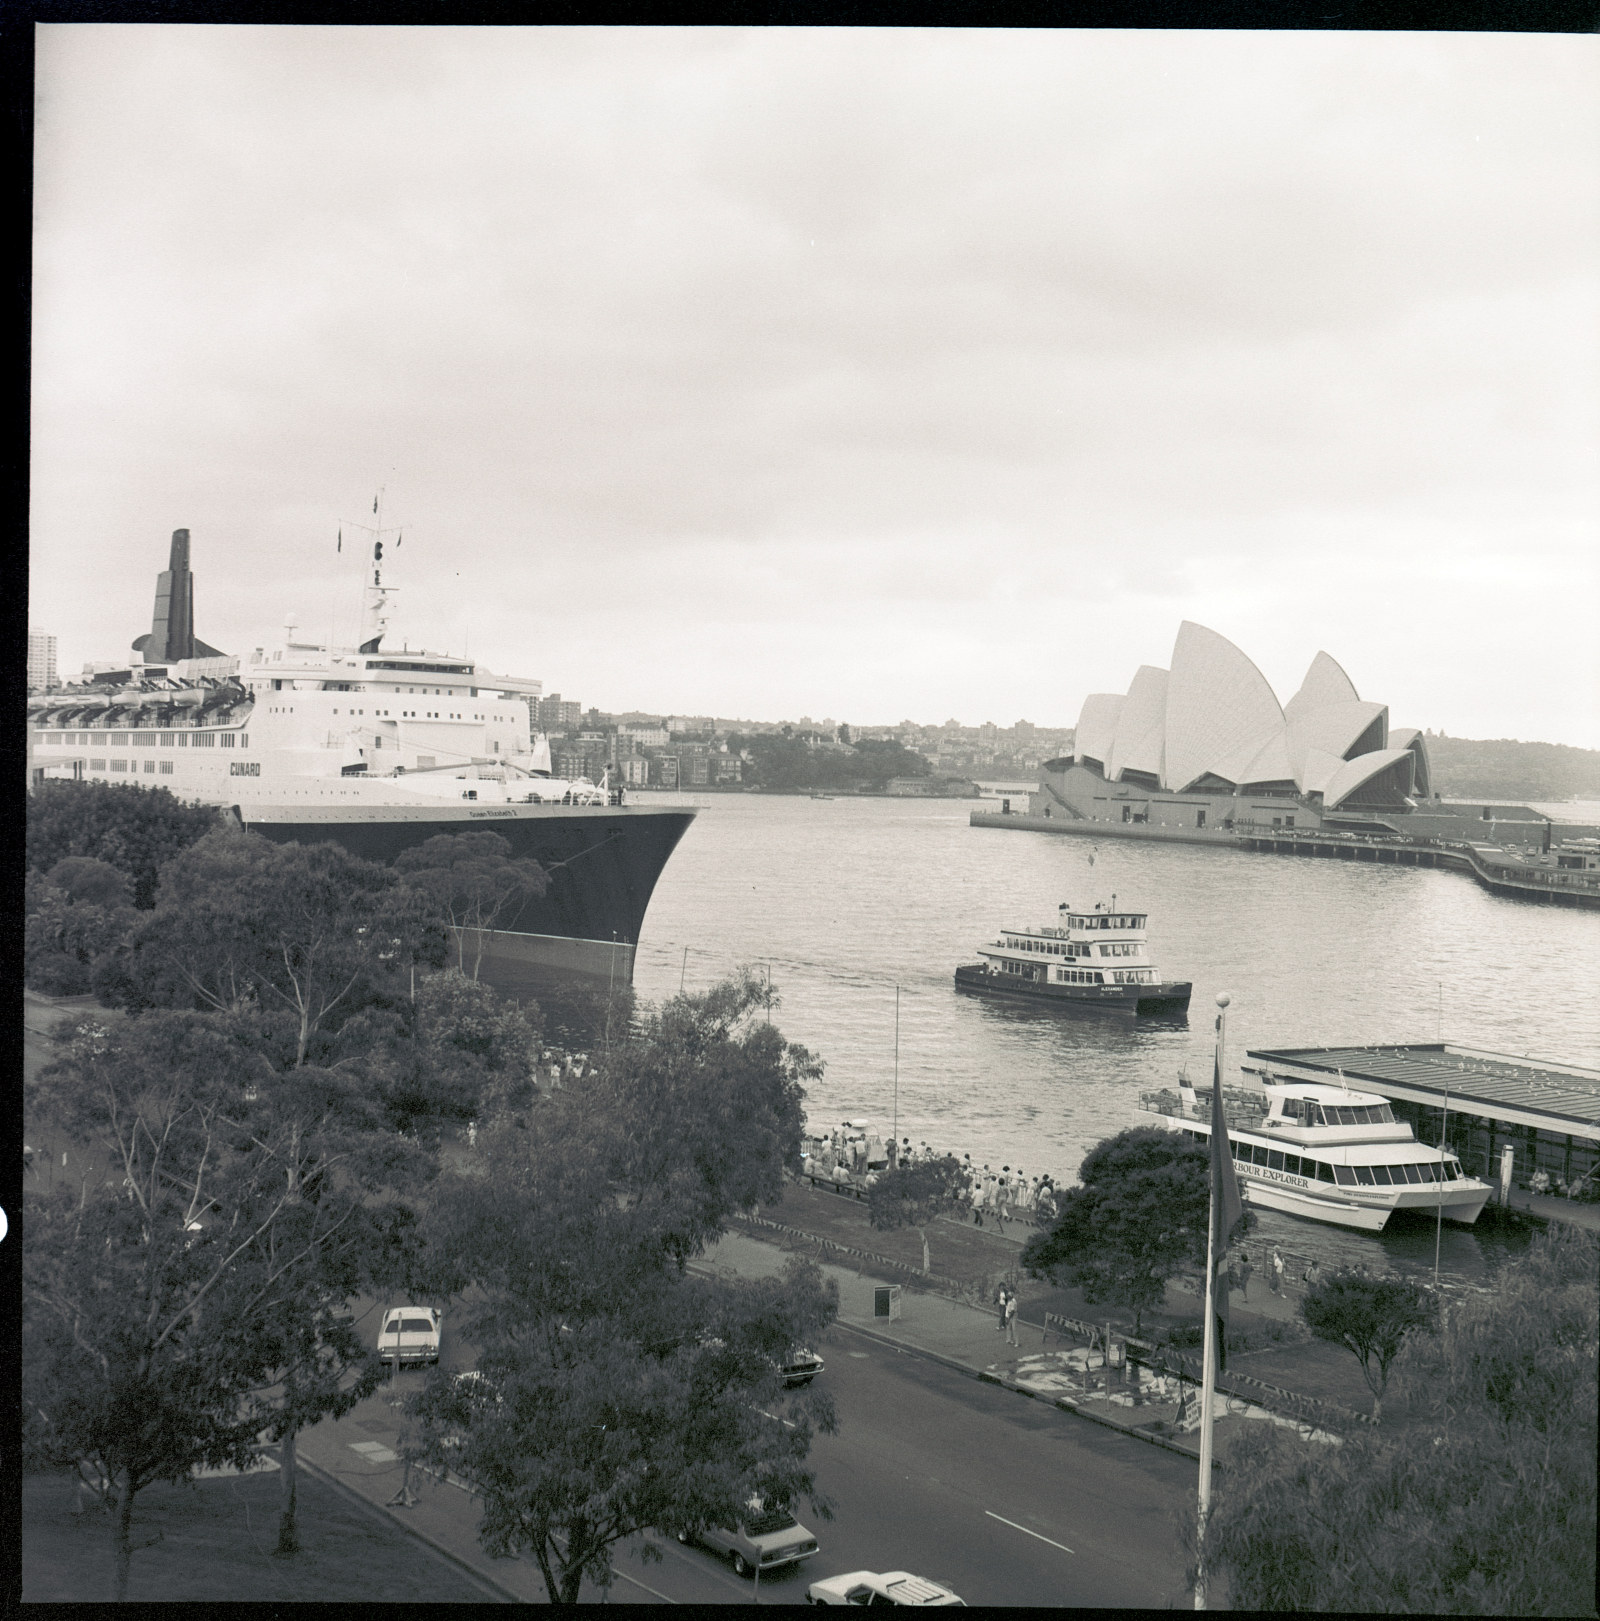 Government Printing Office 4 - 29375 - Arrival of QE2 in Sydney [Government Printer; Queen Elizabeth 2 (ocean liner); Circular Quay (Sydney, N.S.W.); Sydney Opera House (N.S.W.); harbours; ocean liners; jetties & wharves] [GPO original locations or series - 85-11] [14.2.85]